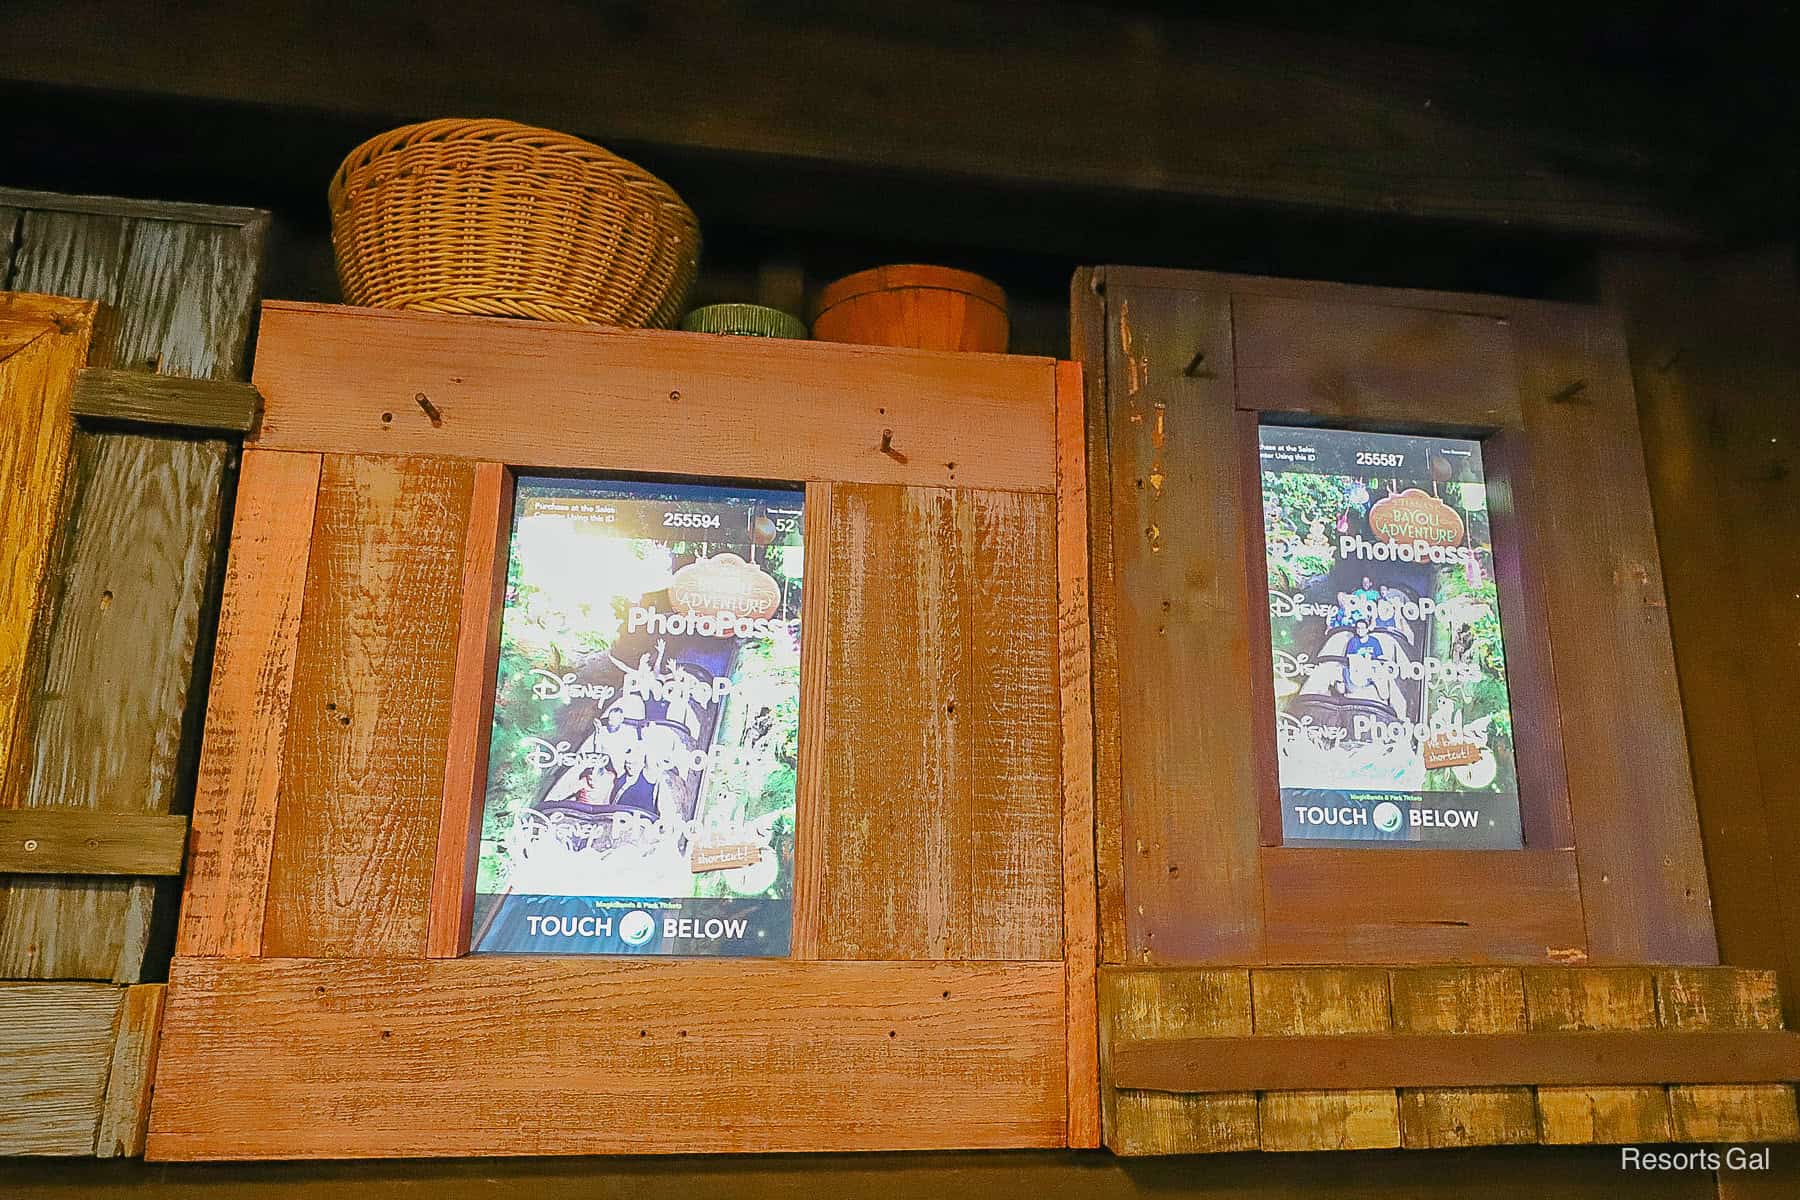 a PhotoPass screen where guests can view photos after the ride 